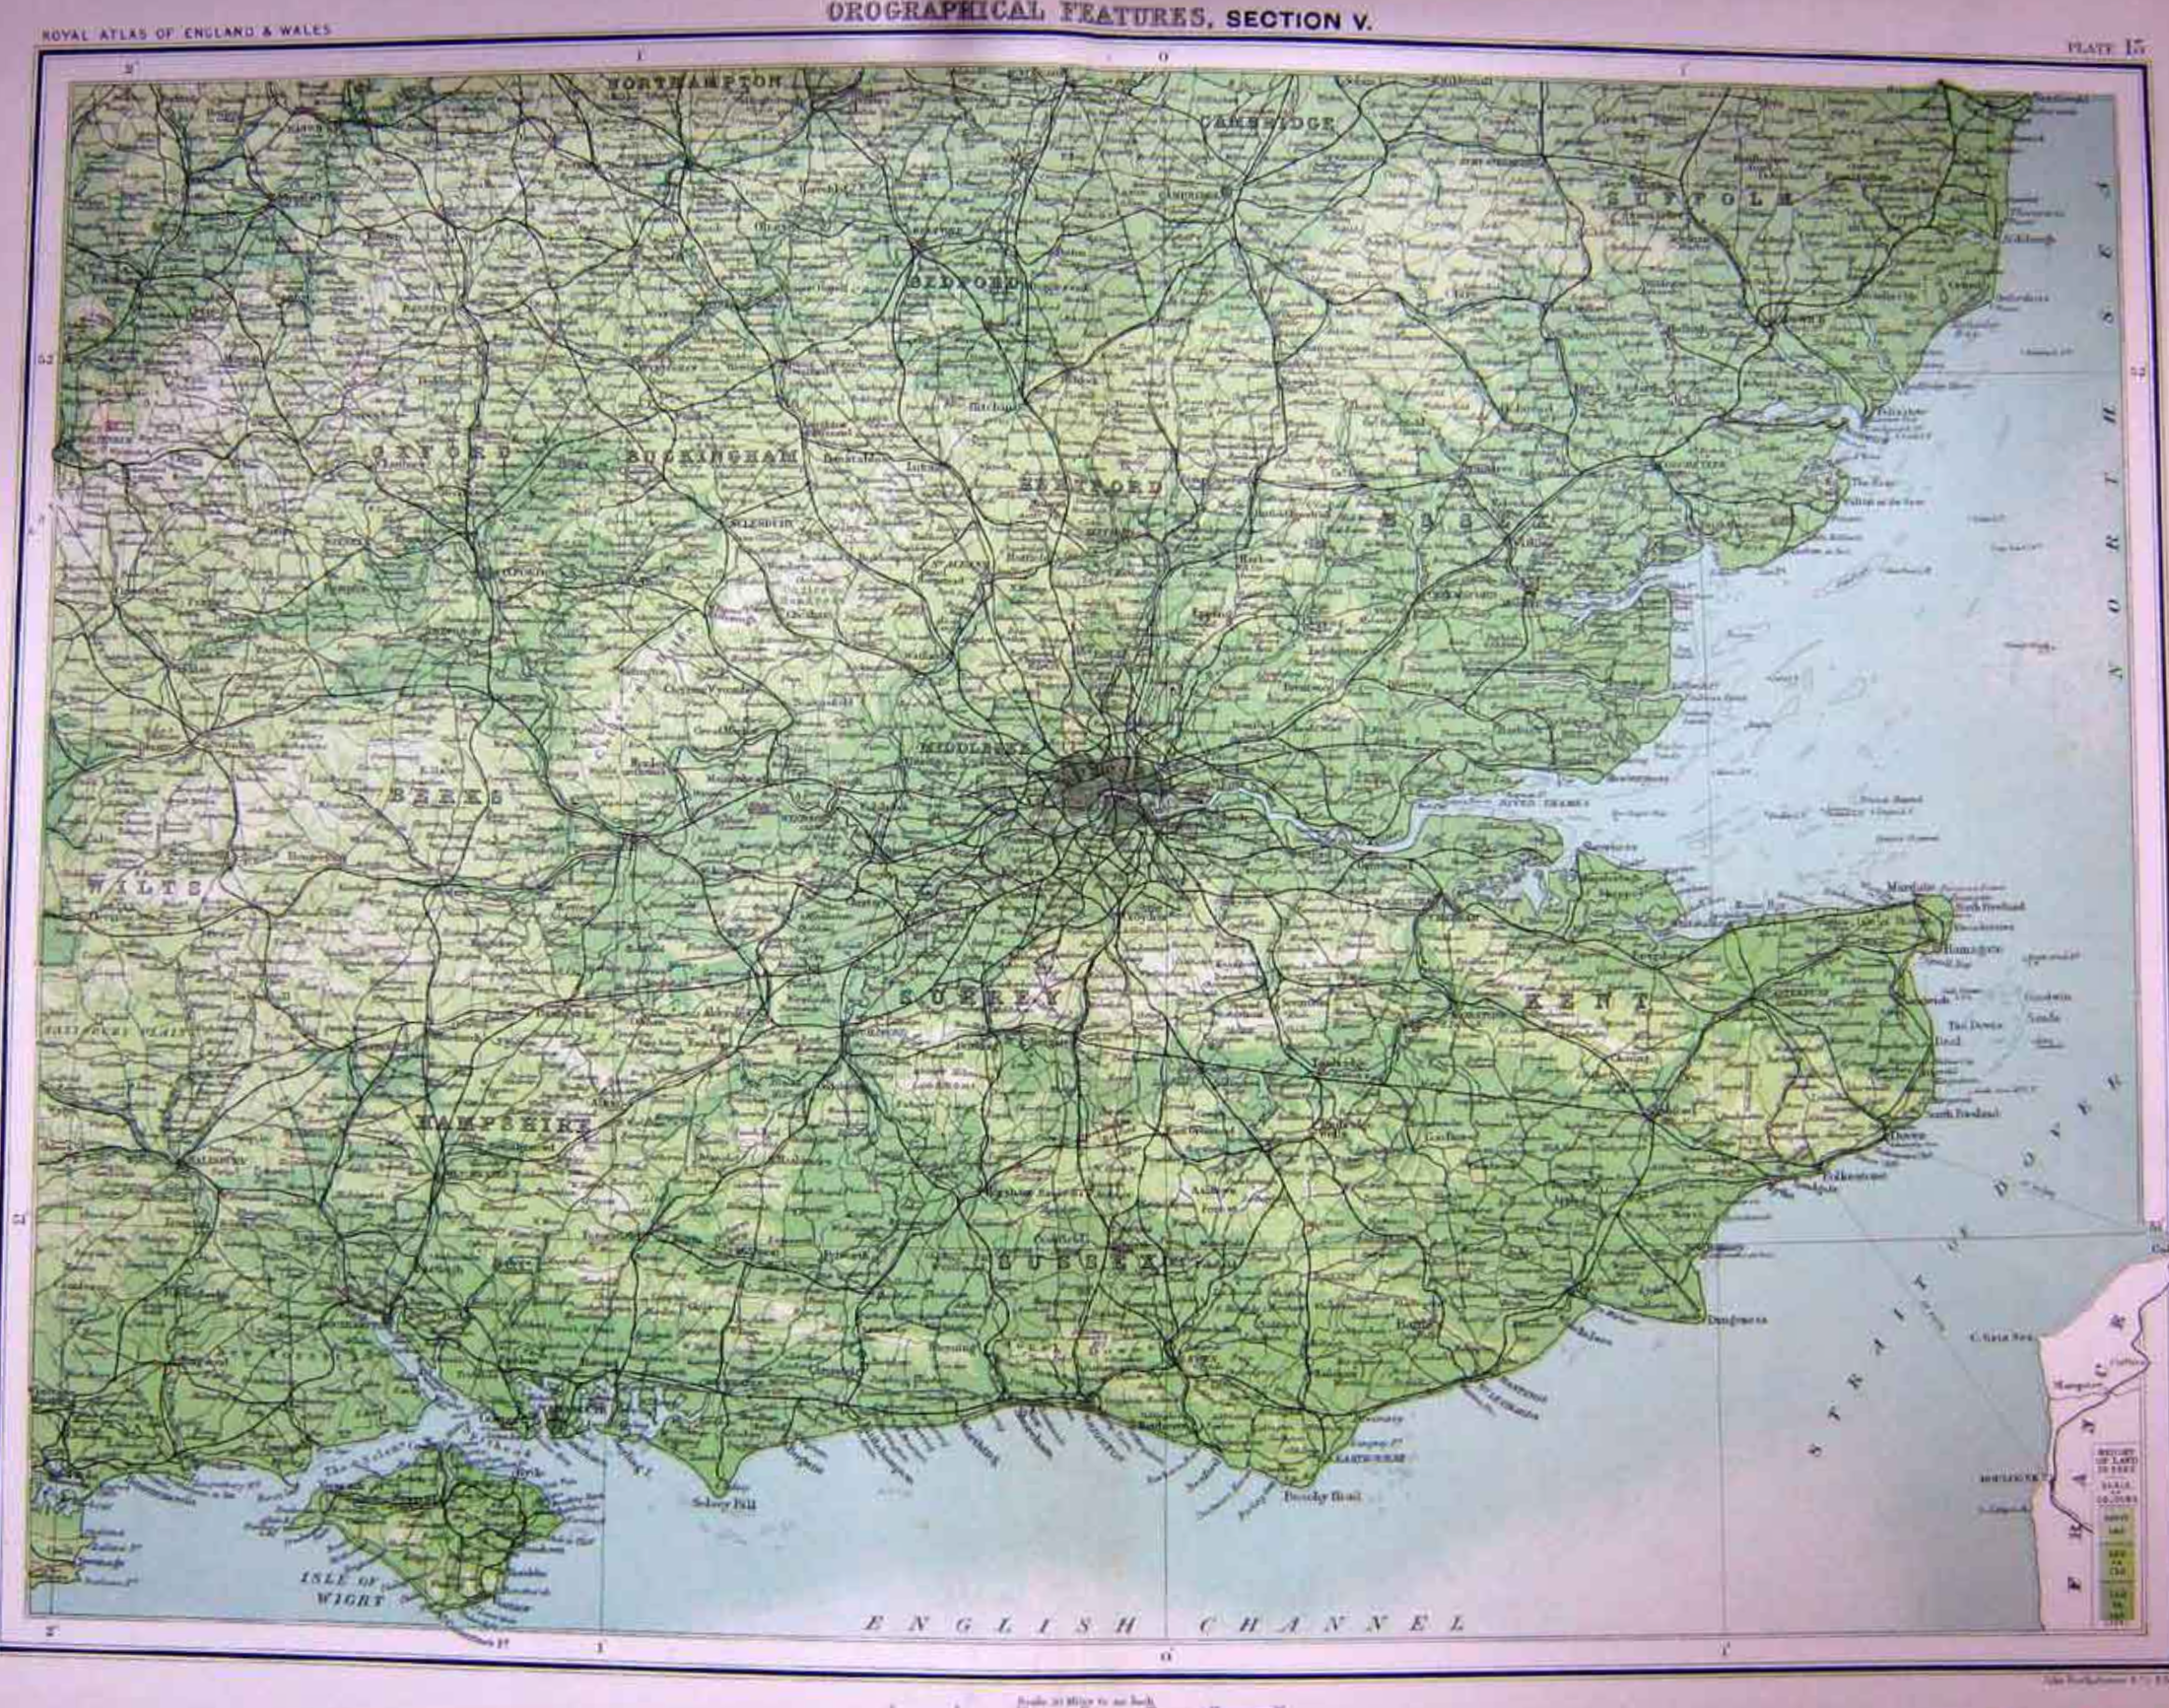 Victorian 1897 Orographical Map Kent, Sussex, Surrey, Hampshire, Berks.